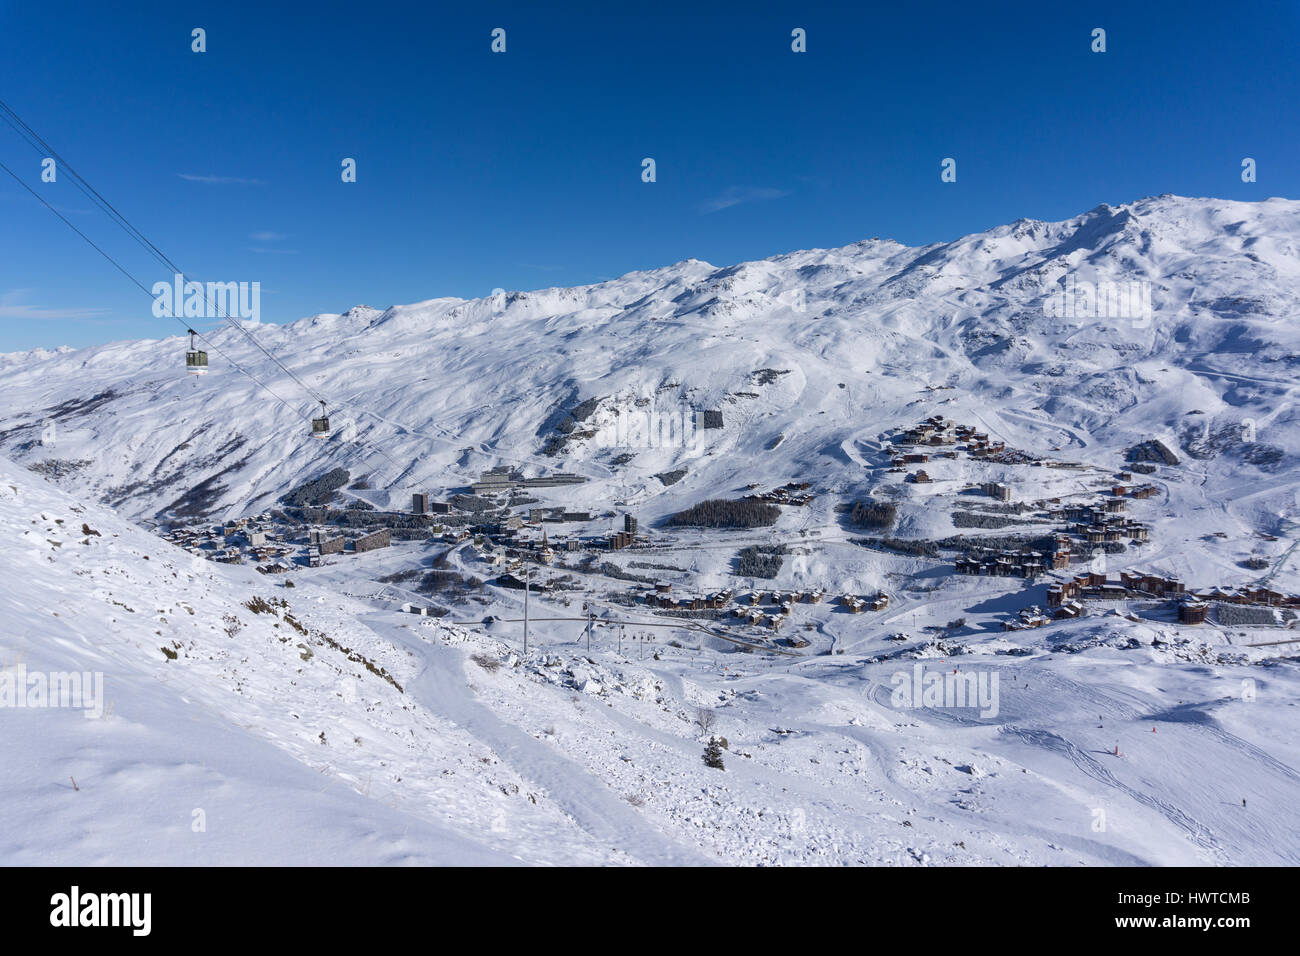 Distant view of the ffrench ski resort Les Menuires in the Three Valleys Stock Photo